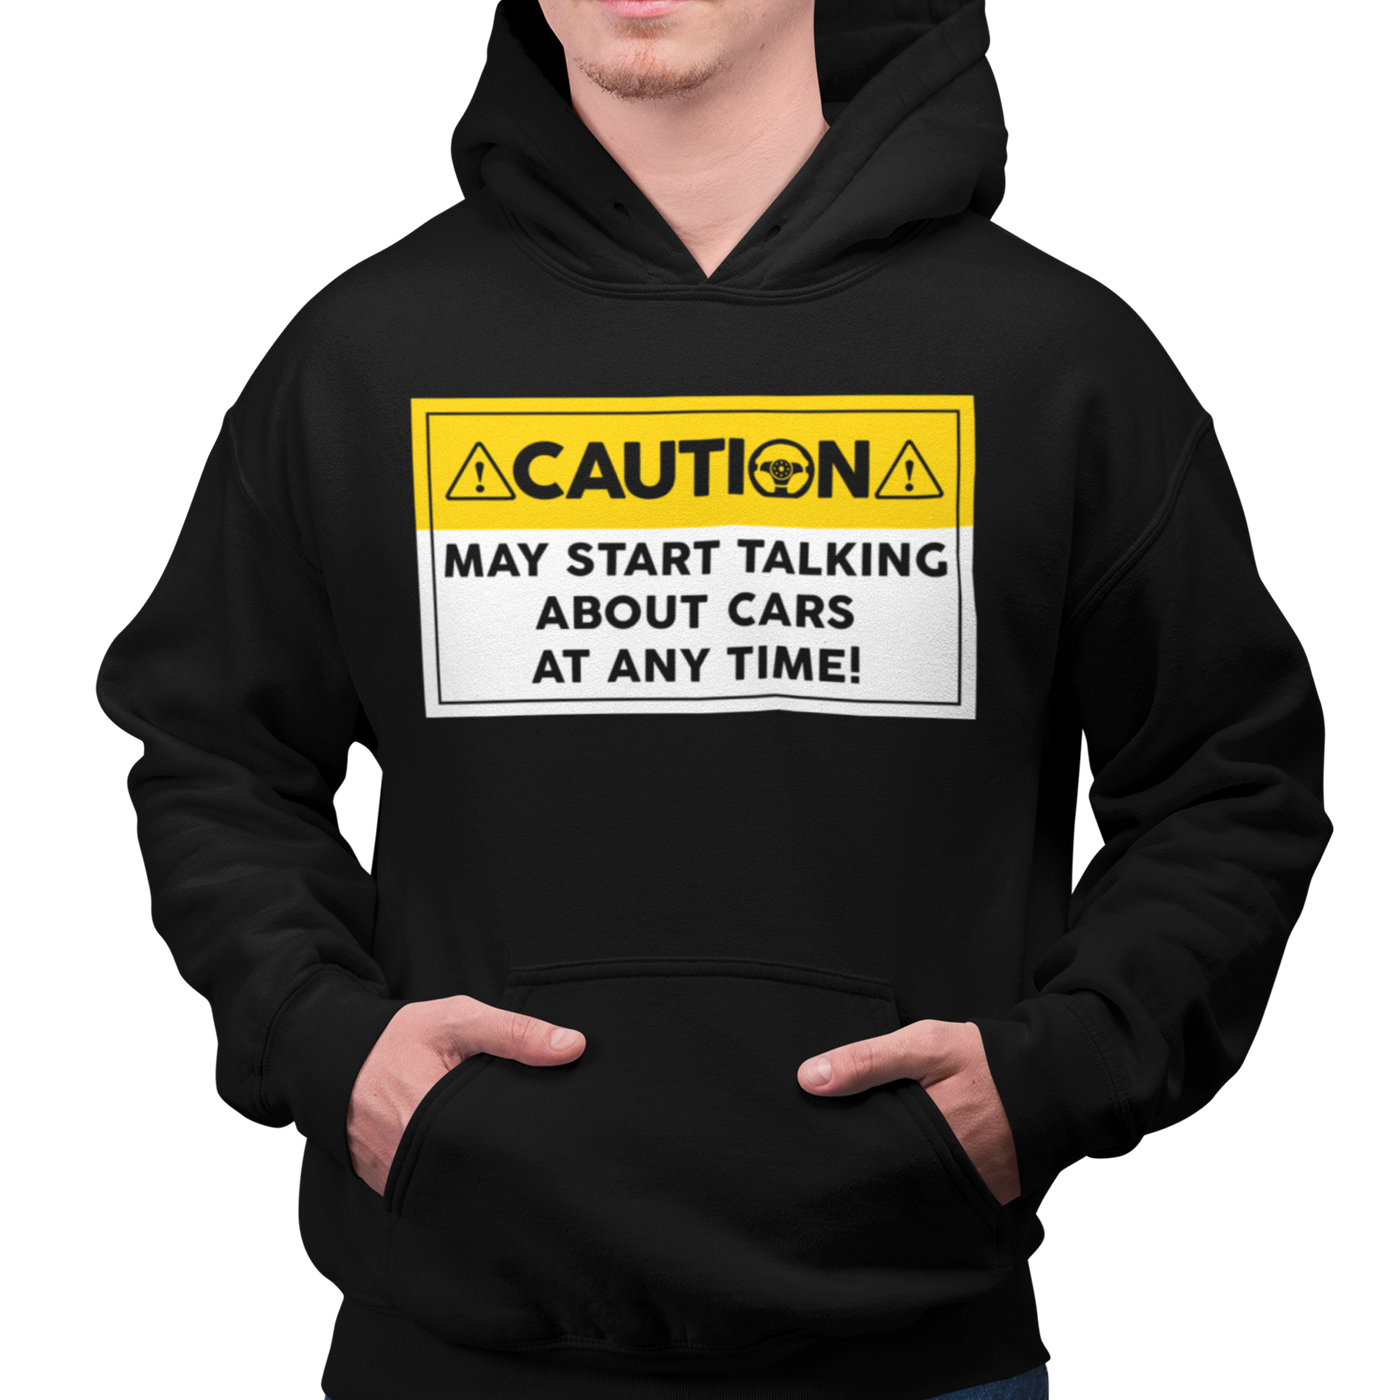 CAUTION MAY START TALKING CARS Hoodie